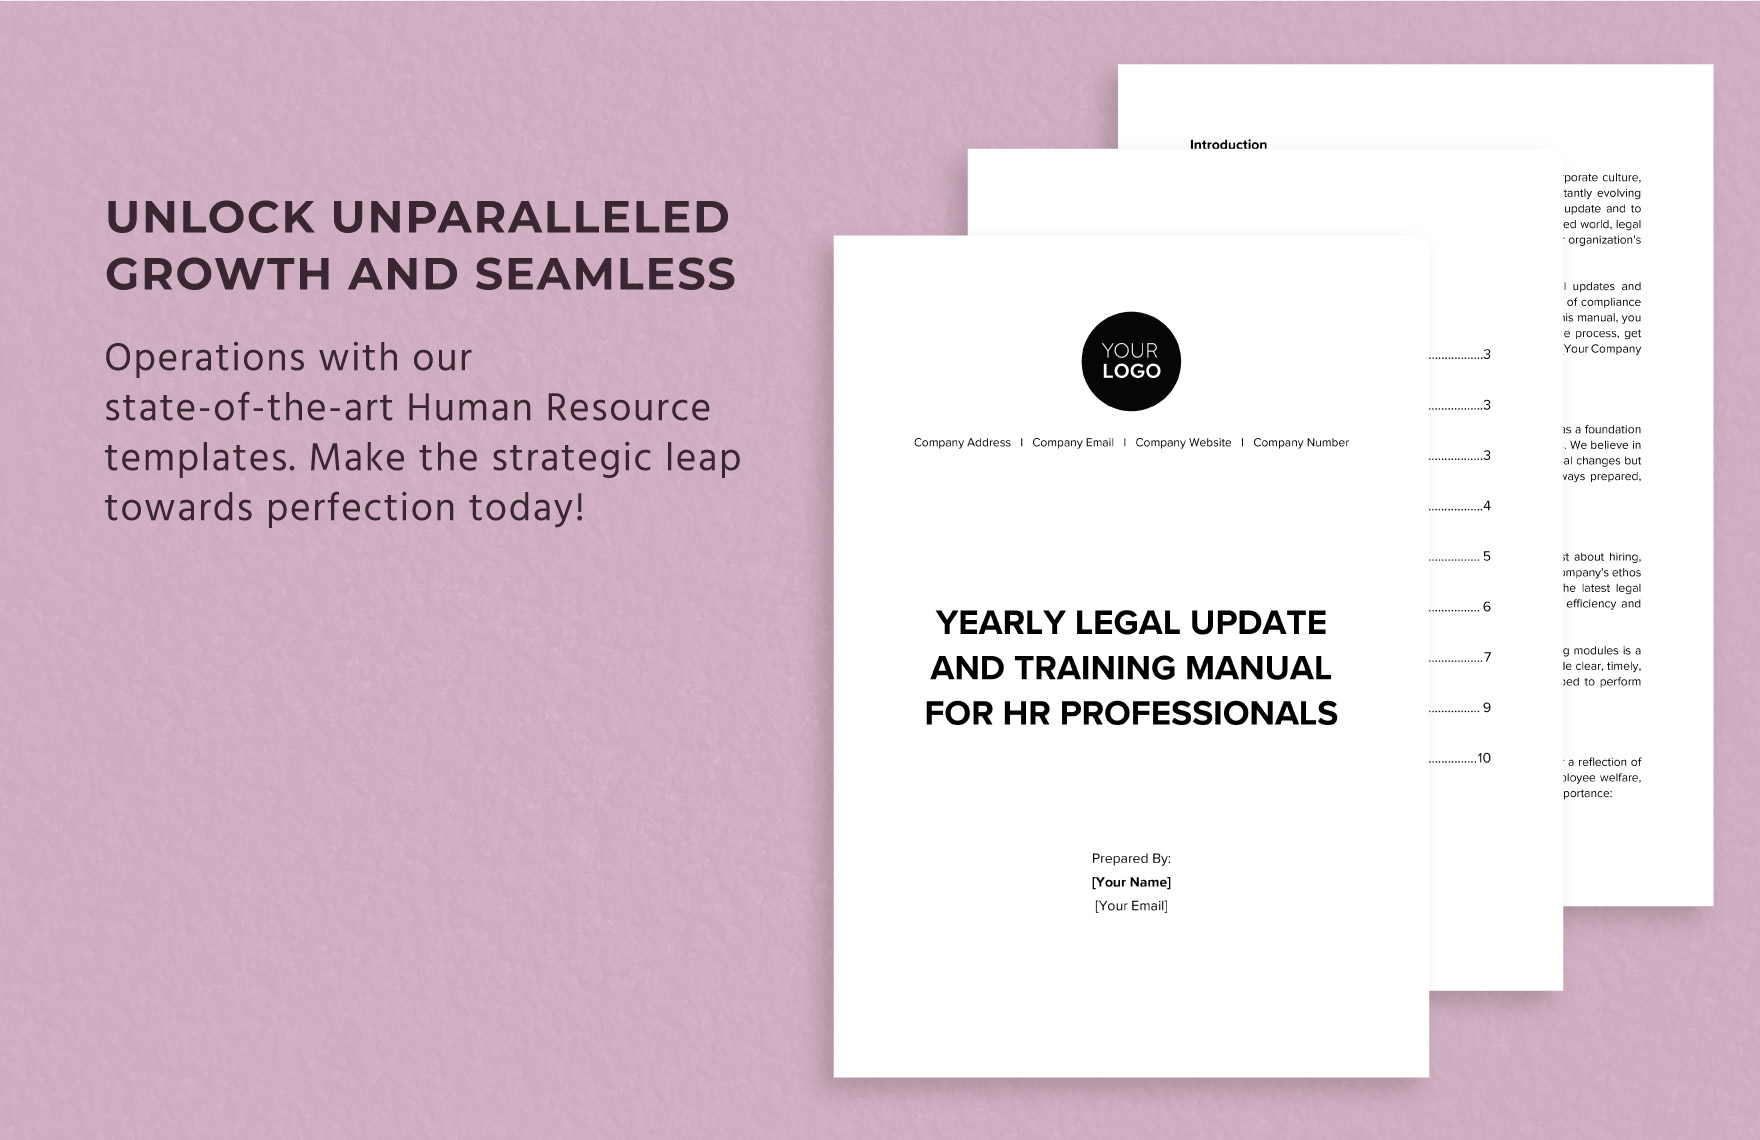 Yearly Legal Update and Training Manual for HR Professionals Template